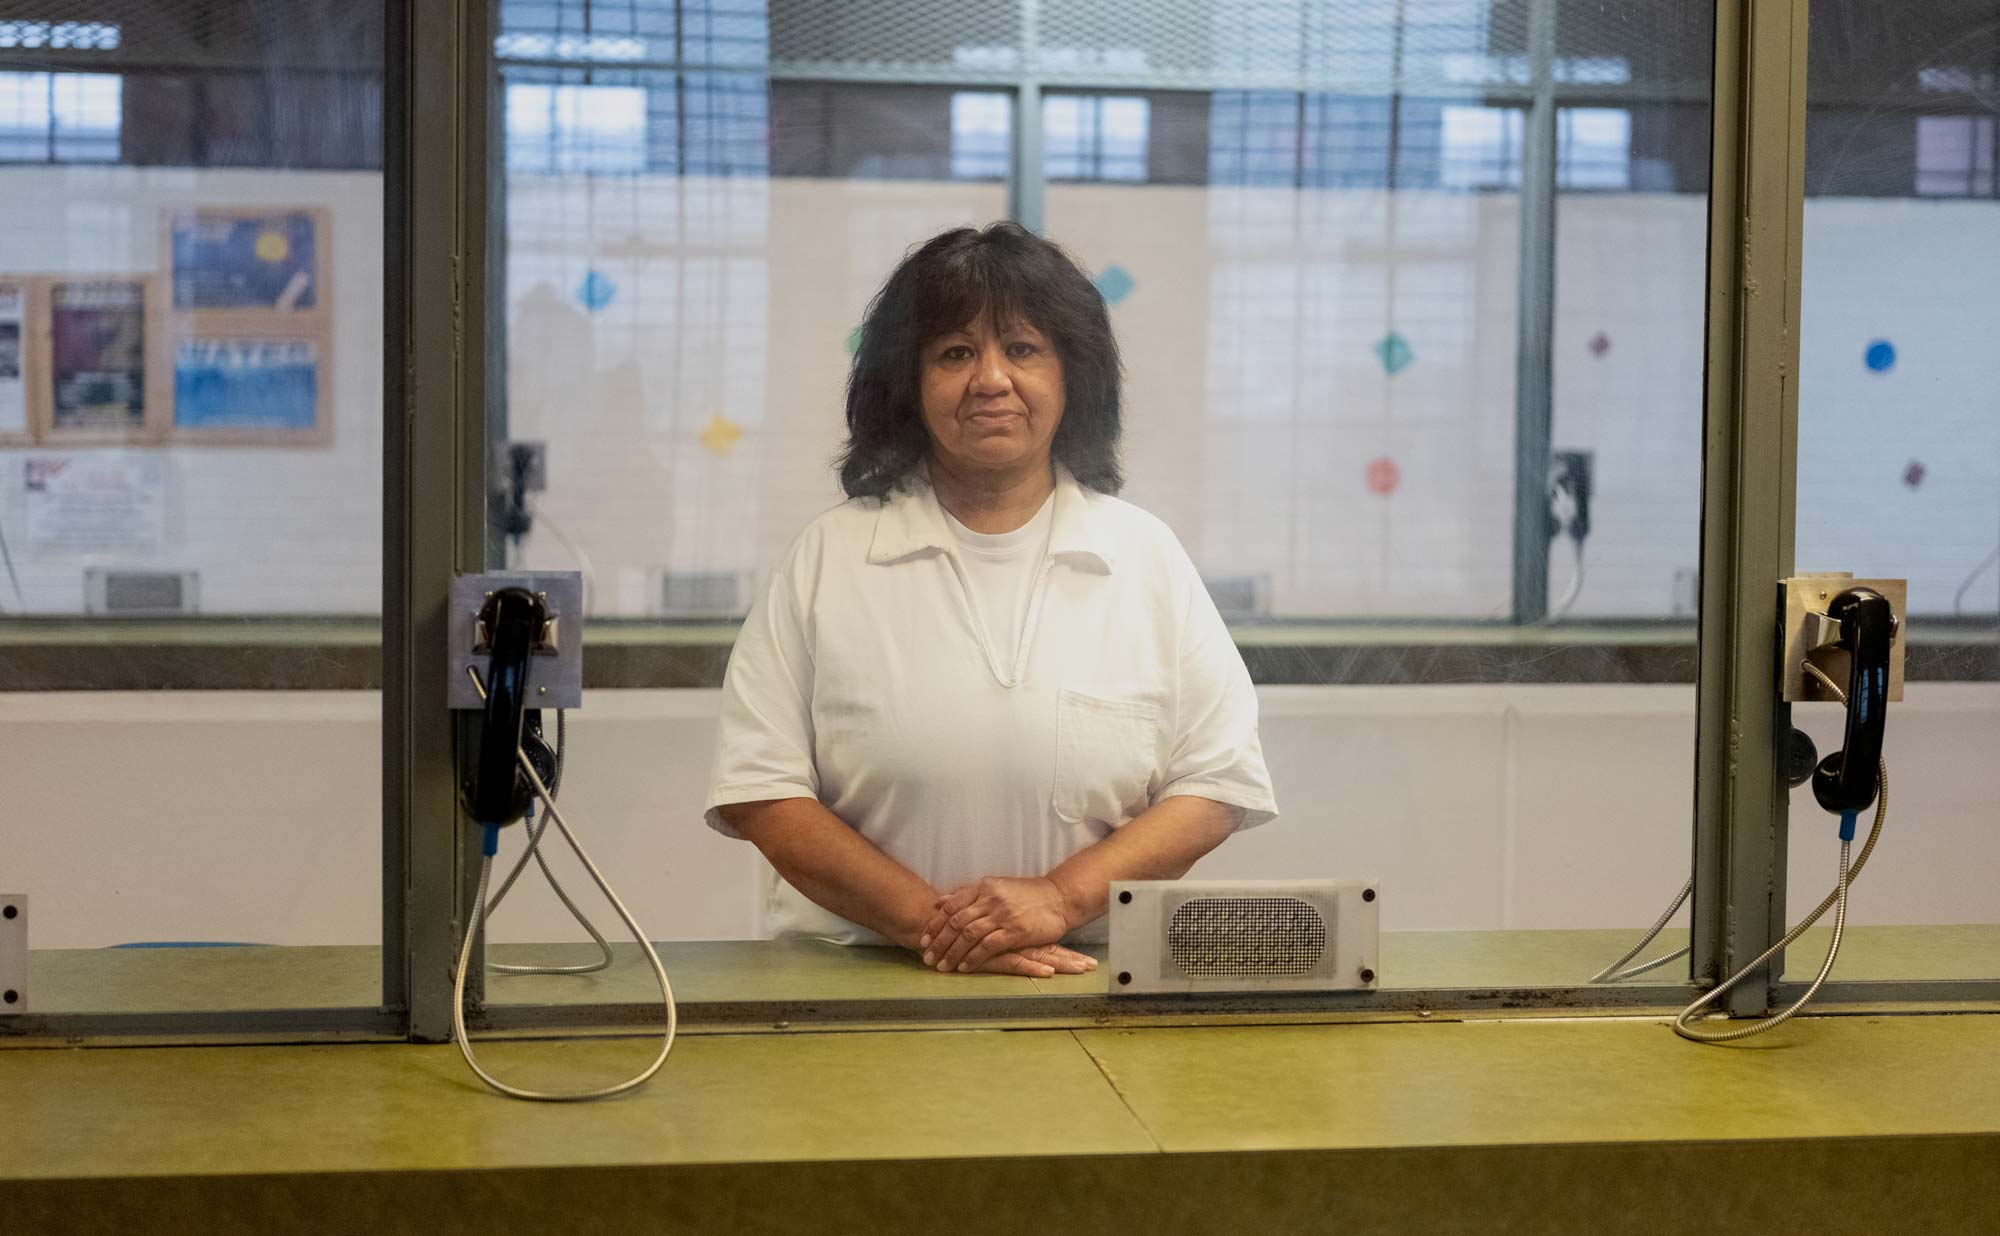 GATESVILLE, TEXAS - March 21, 2022: Melissa Lucio poses for a portrait behind glass at the Mountain View Unit in Gatesville, Texas. (Image: Ilana Panich-Linsman for The Innocence Project)
